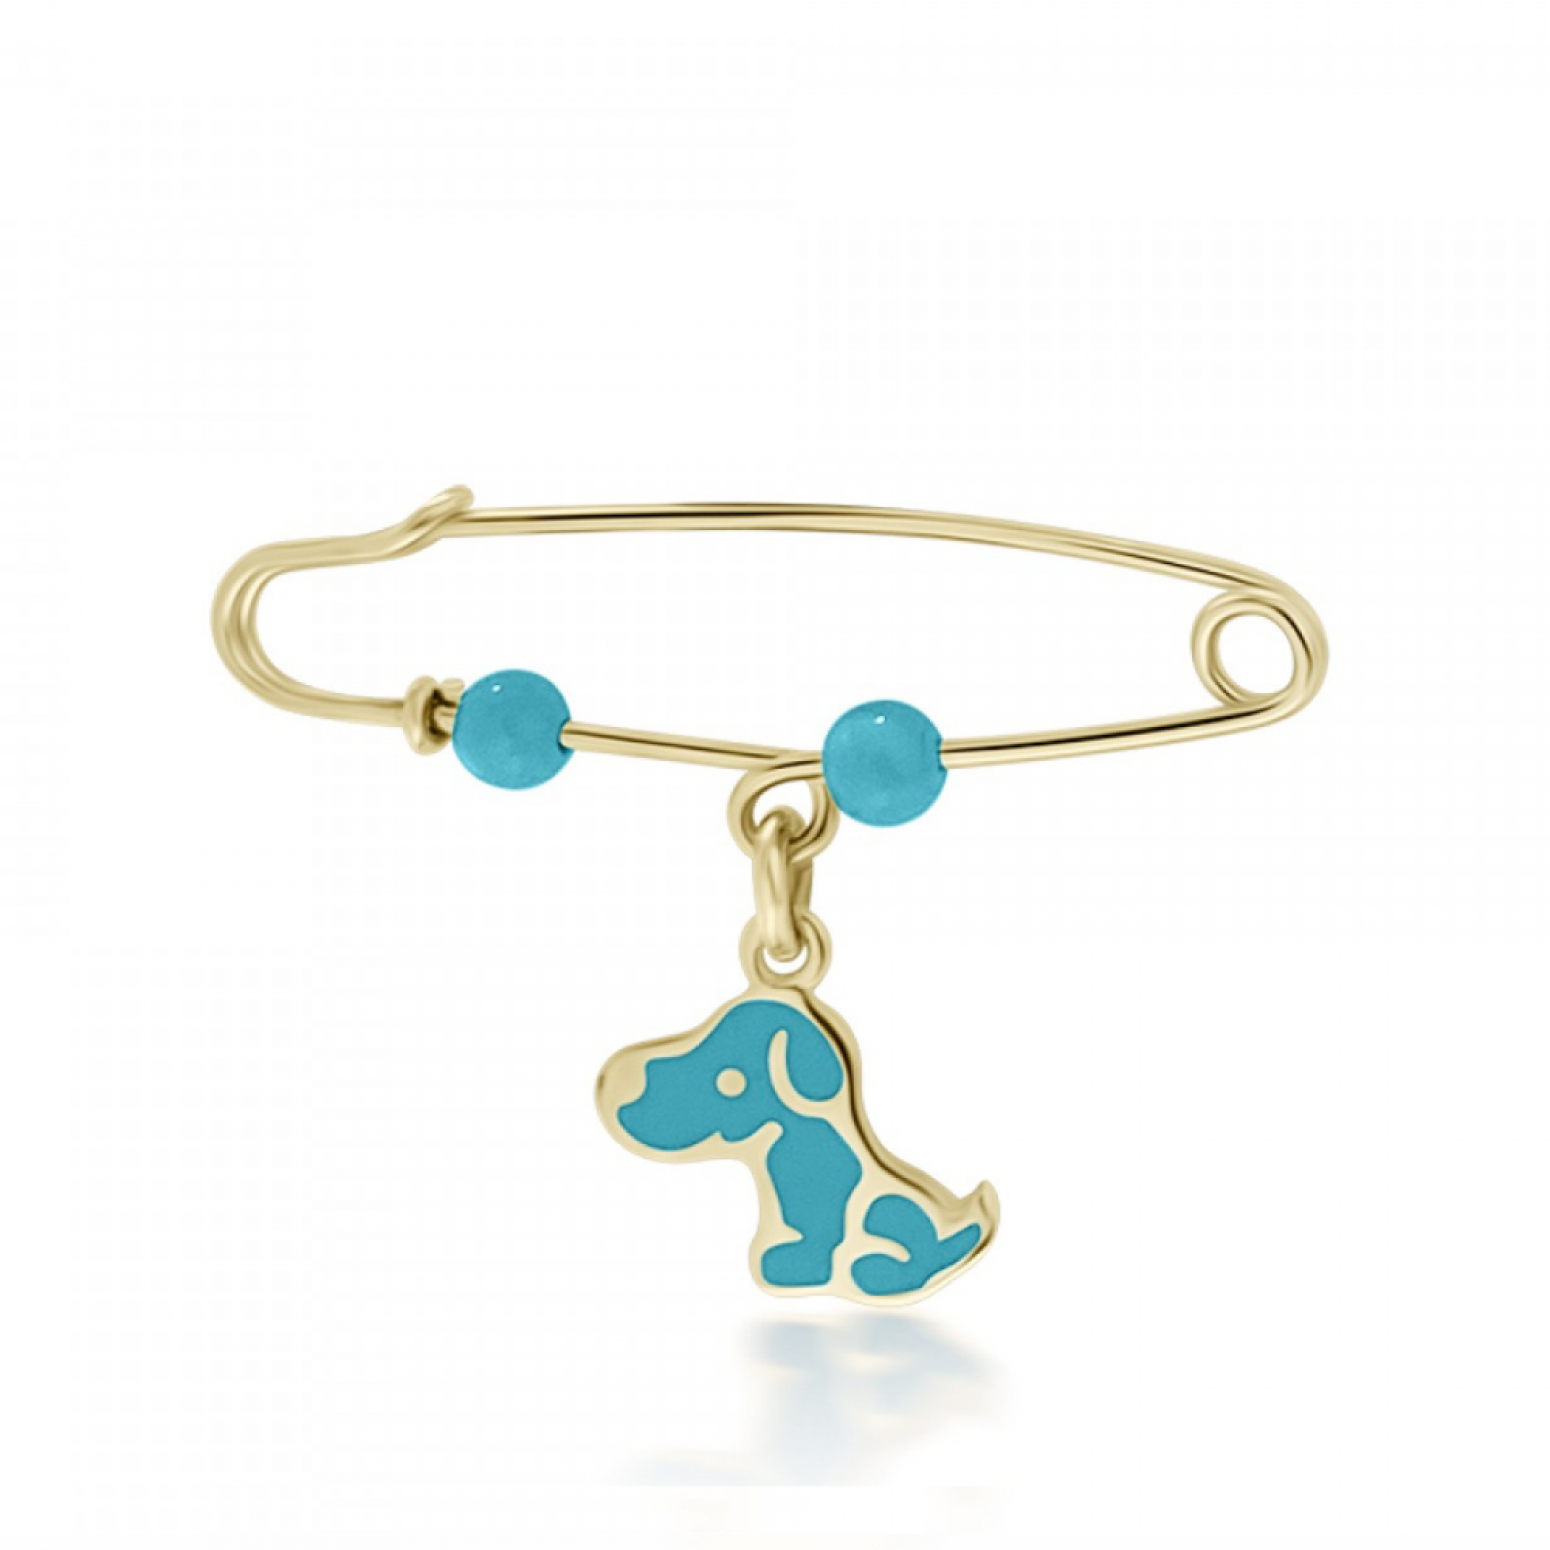 Babies pin K9 gold with dog and turquoise pf0101 BABIES Κοσμηματα - chrilia.gr